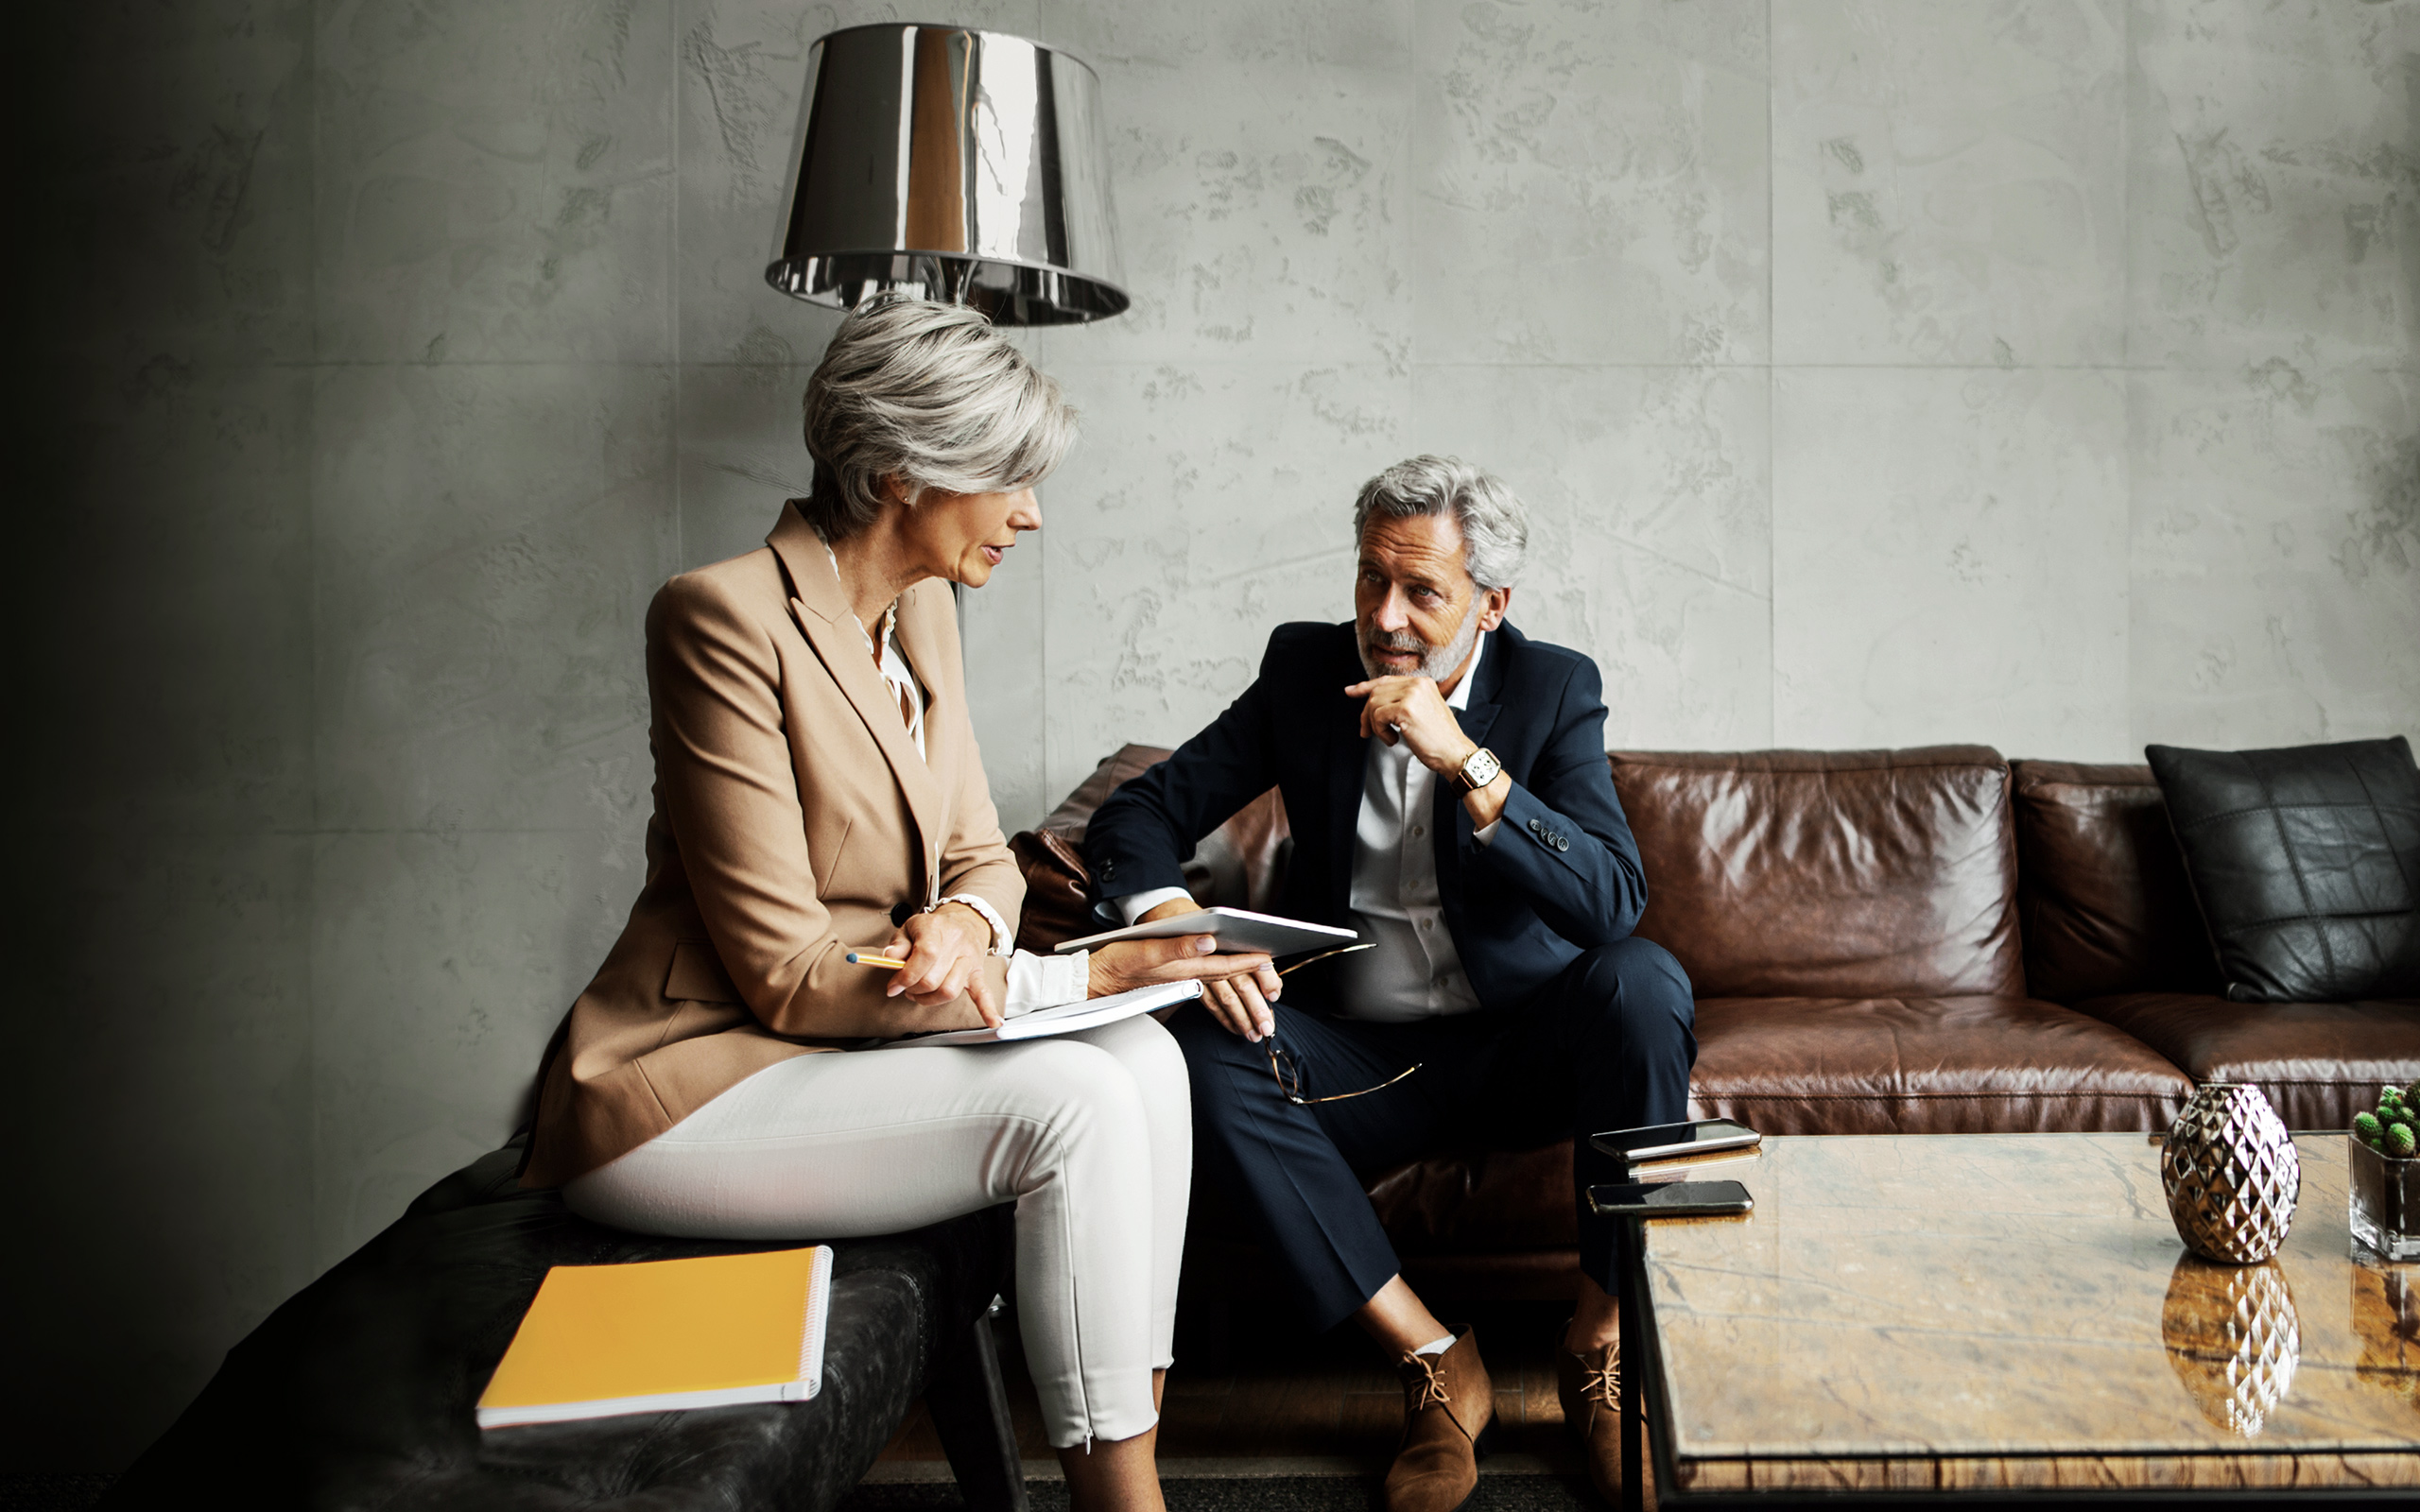 A woman advisor showing a digital tablet to a man sitting on a leather couch.